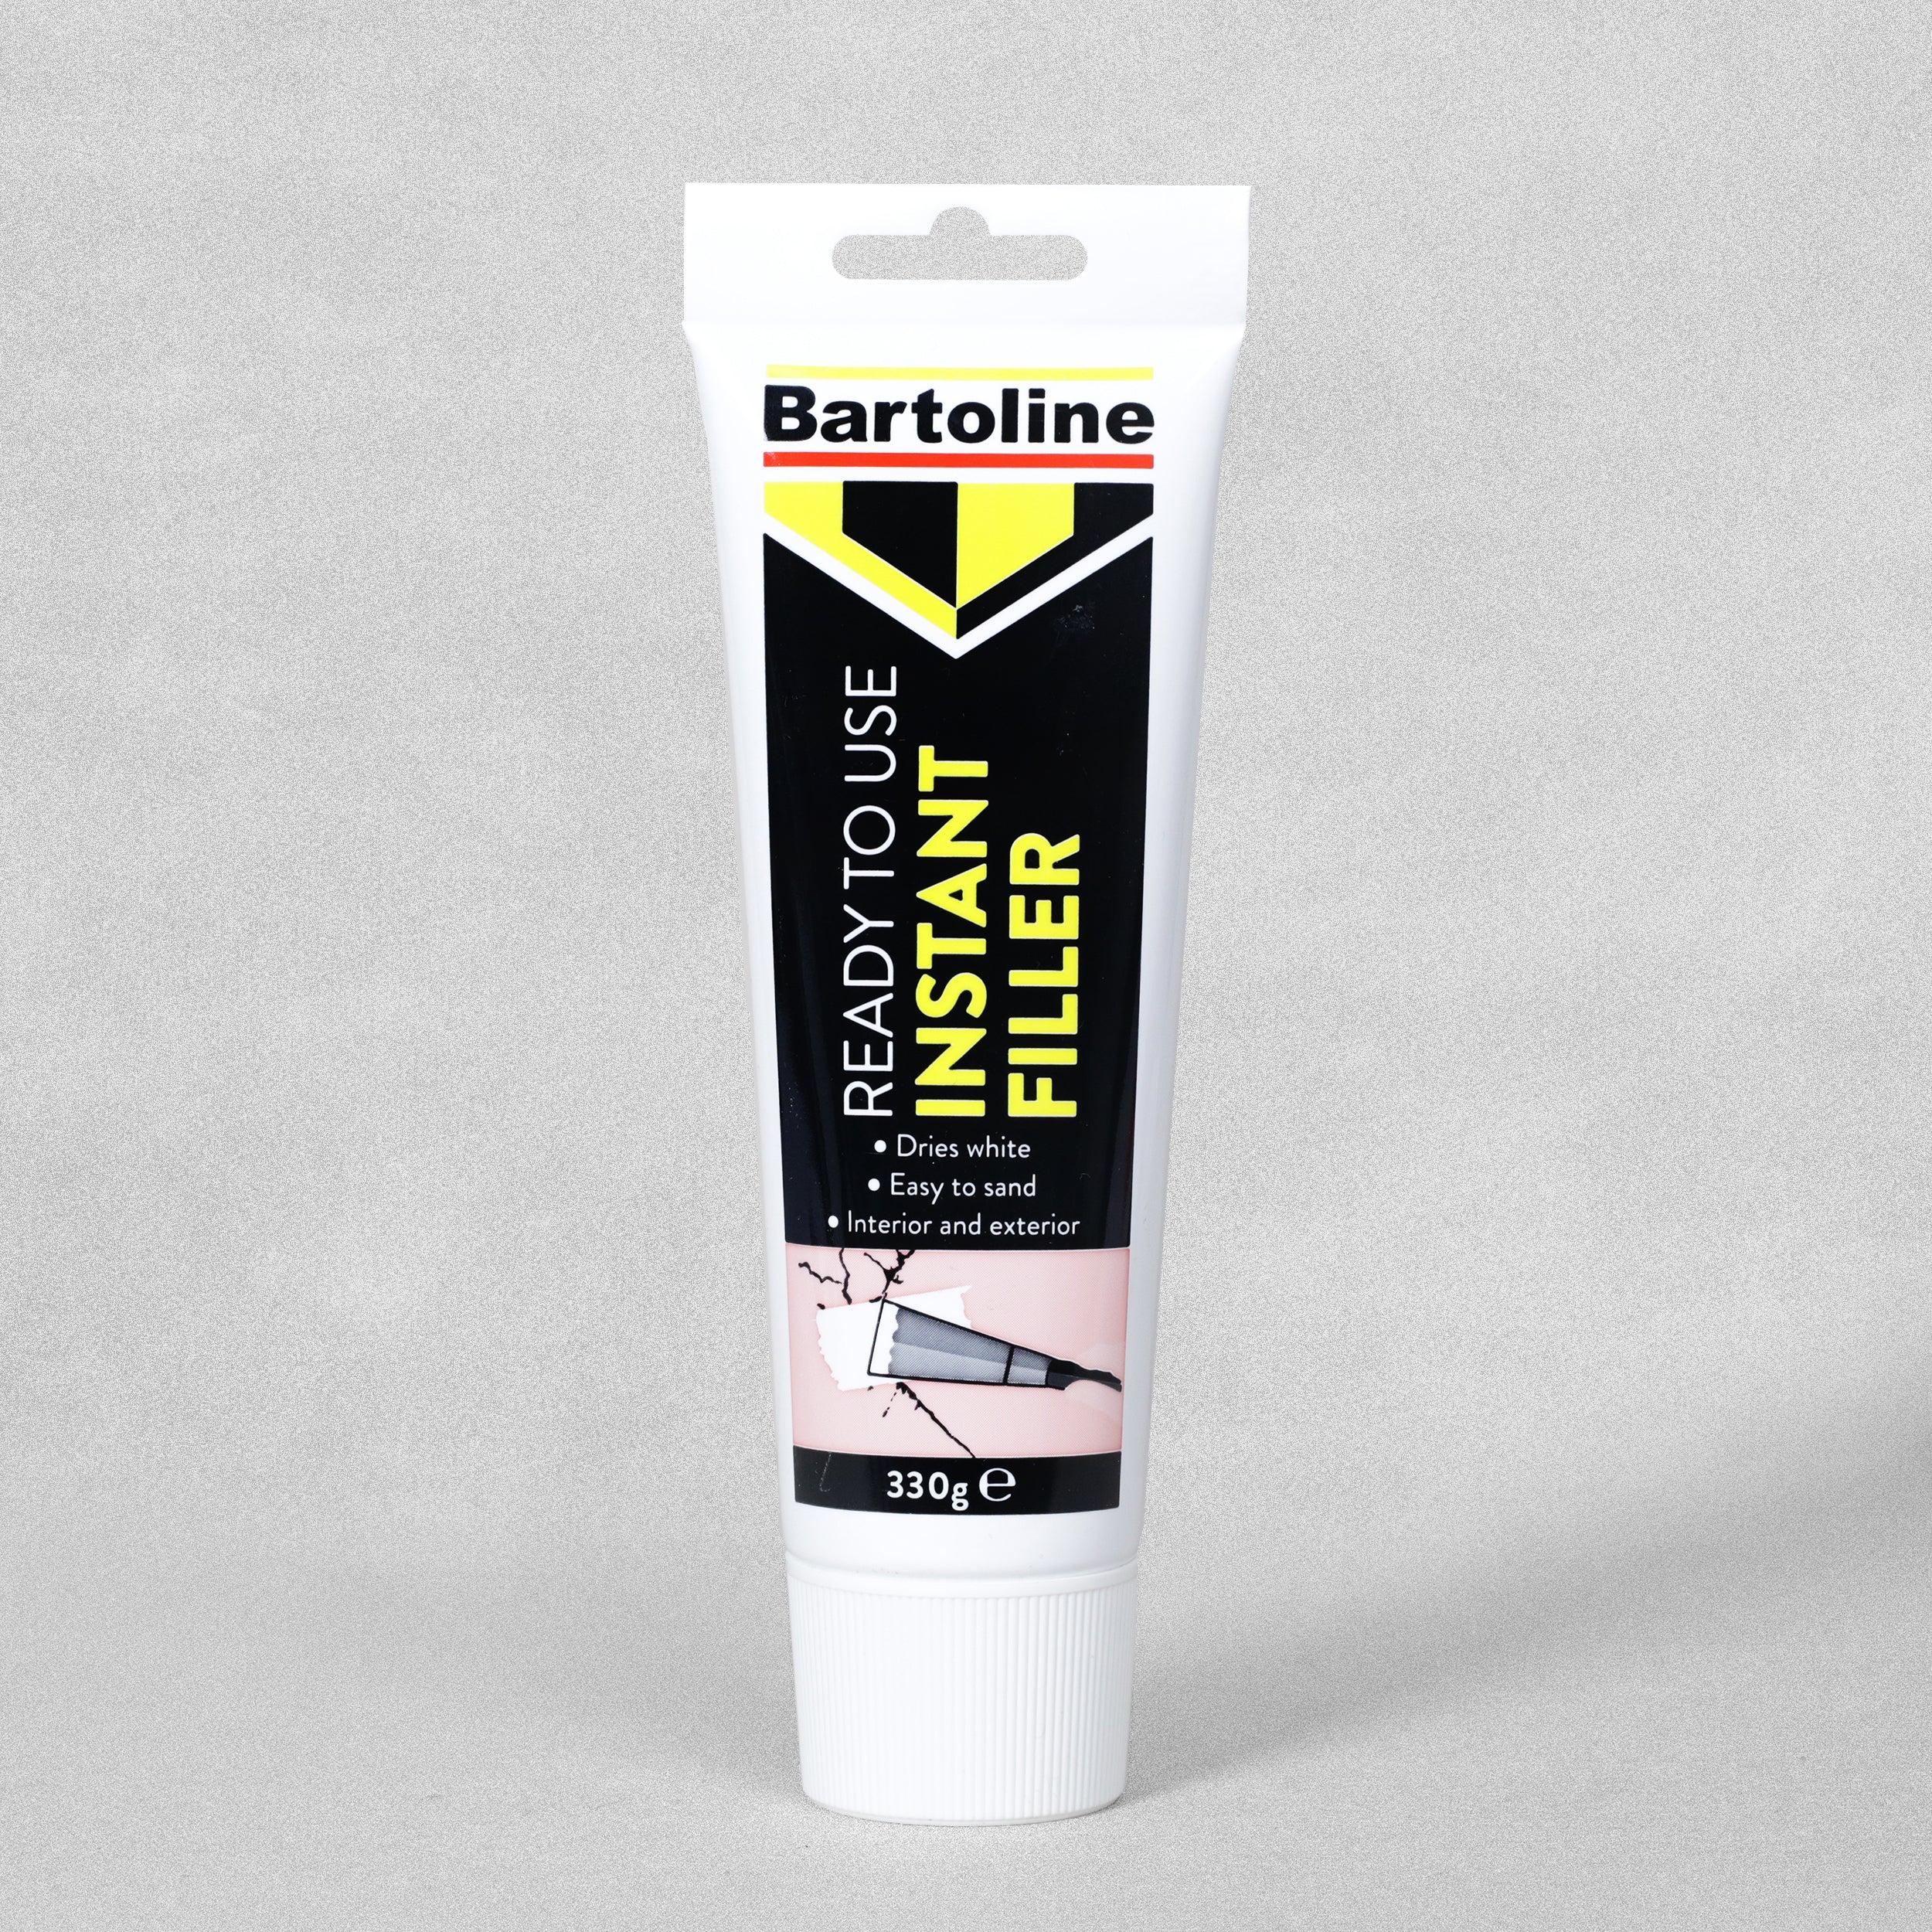 Bartoline 330g Squeezy Tube Instant Ready Mixed Filler